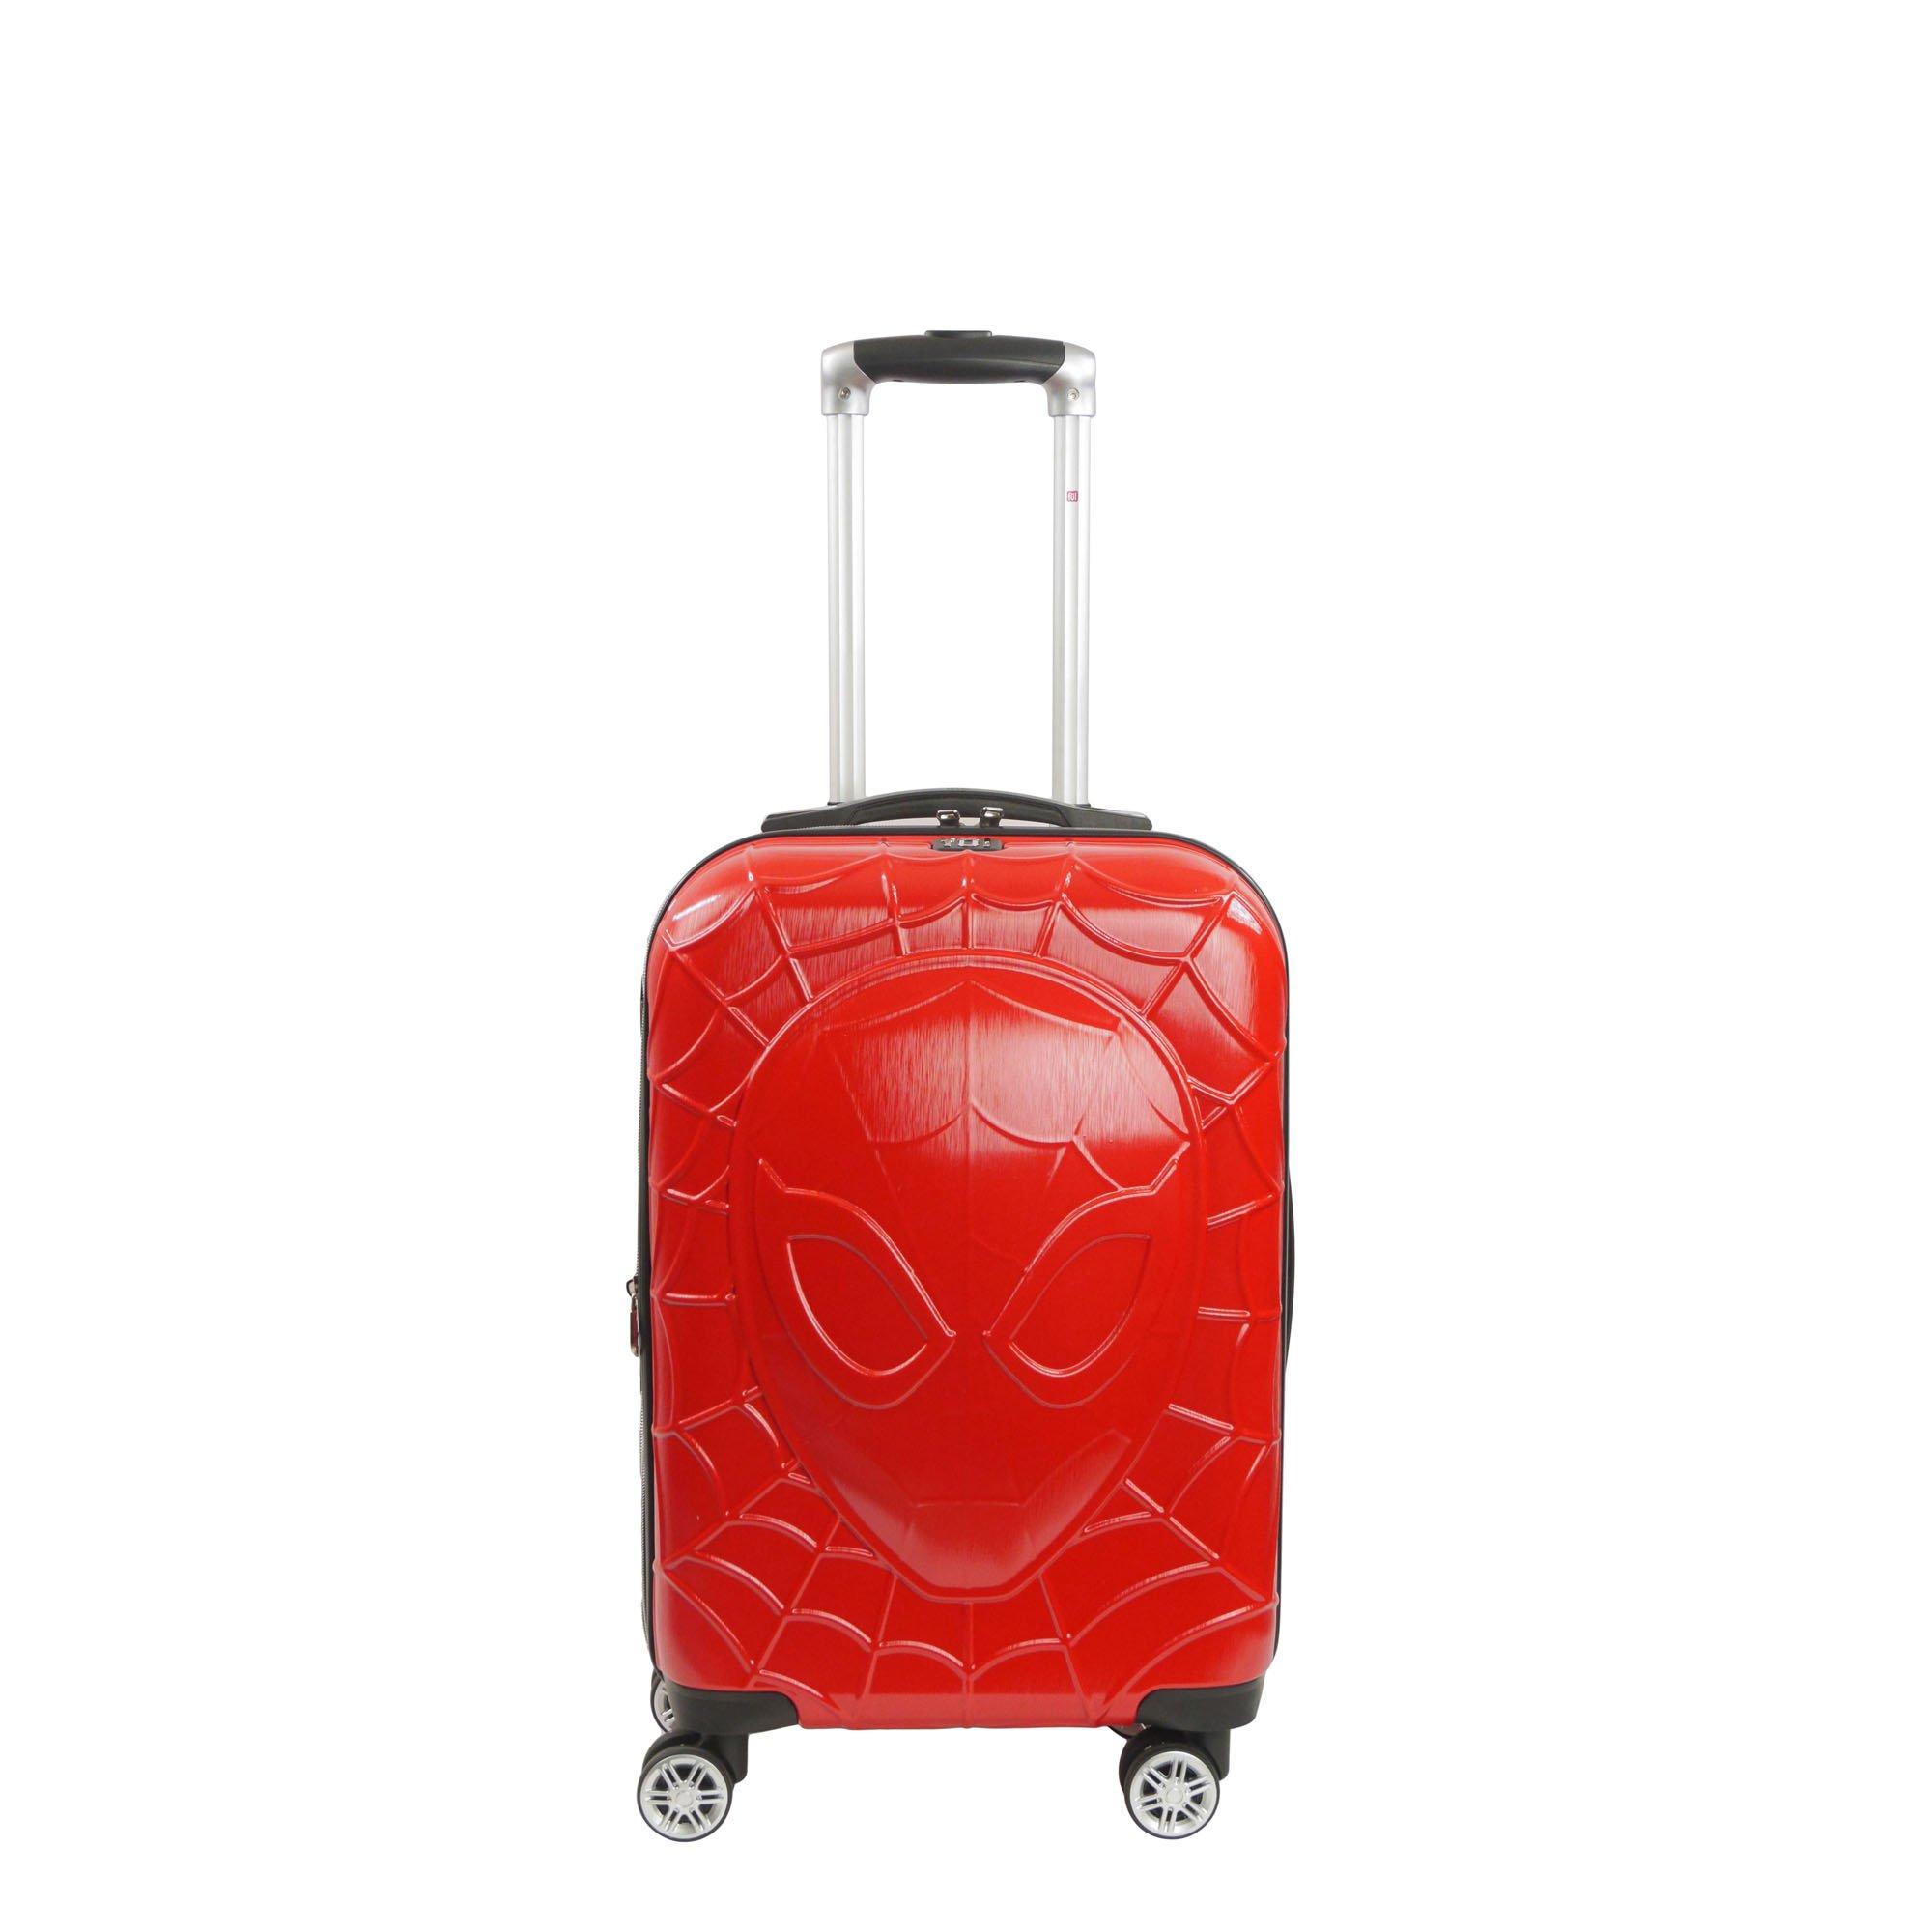 FUL Marvel Molded Spiderman 8 Wheel Expandable Spinner 21-in Carry-On Hard-Sided Luggage, Concept One, Red